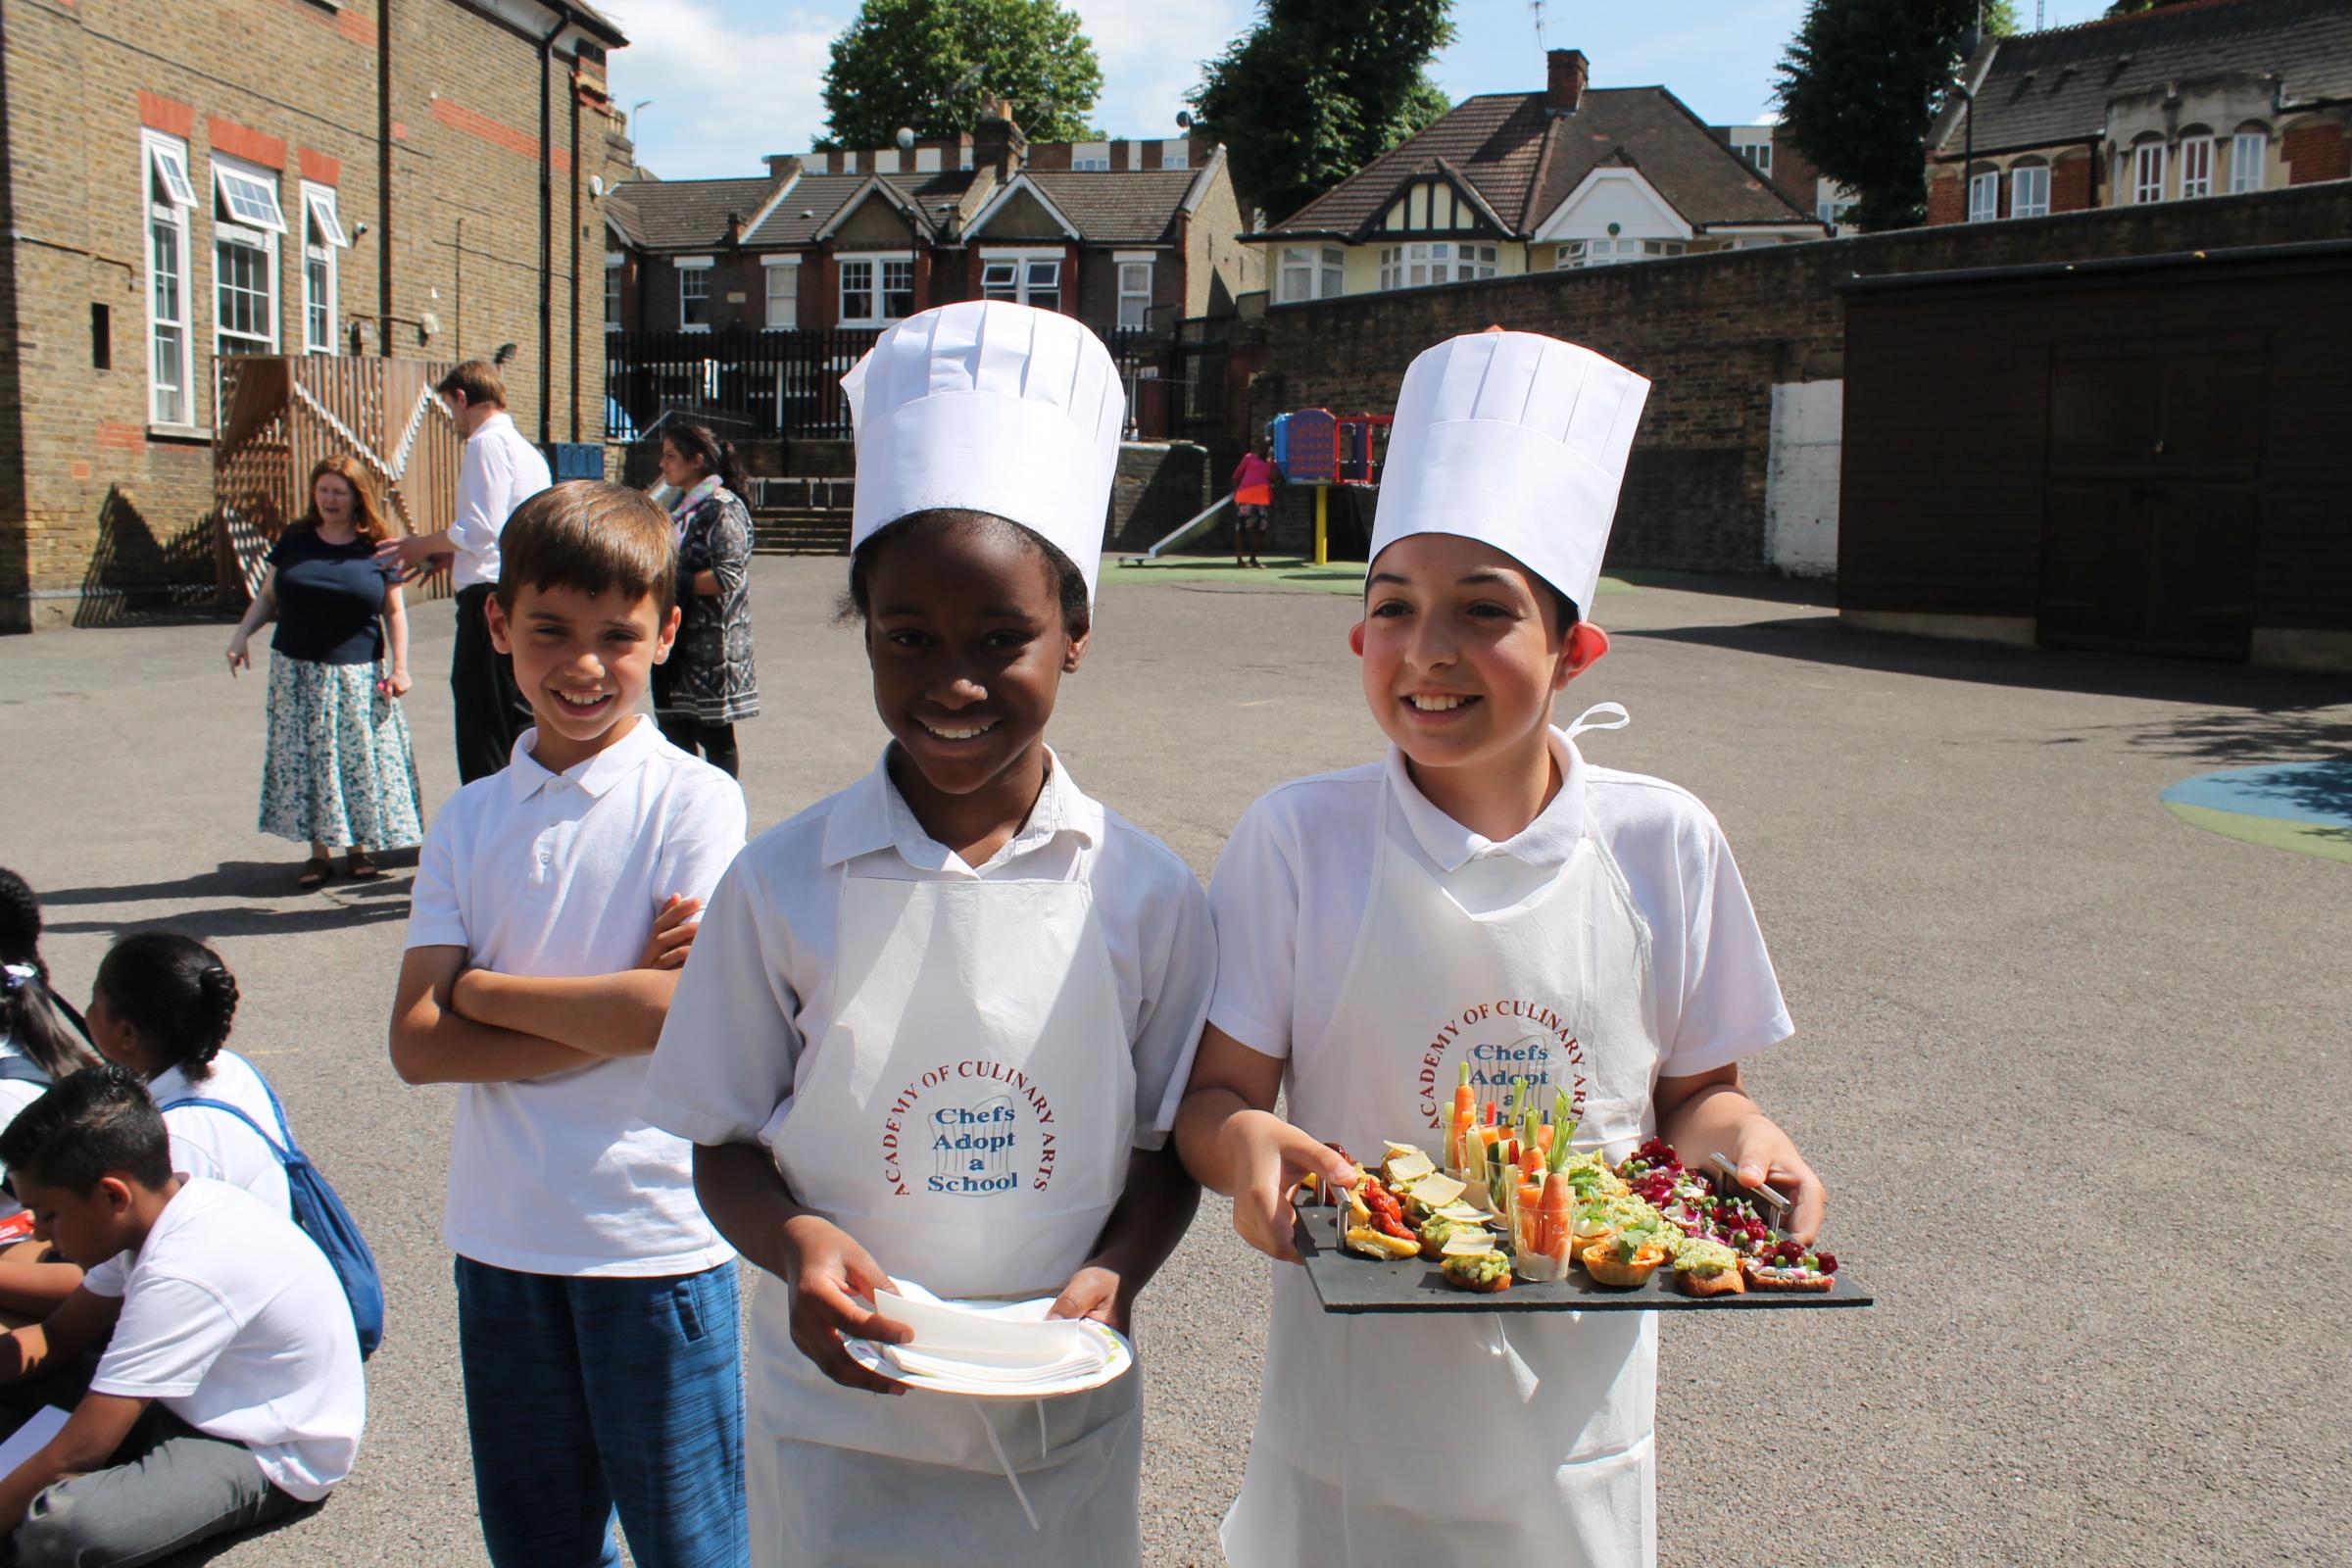 Dinner's served for pupils growing food in their own playground